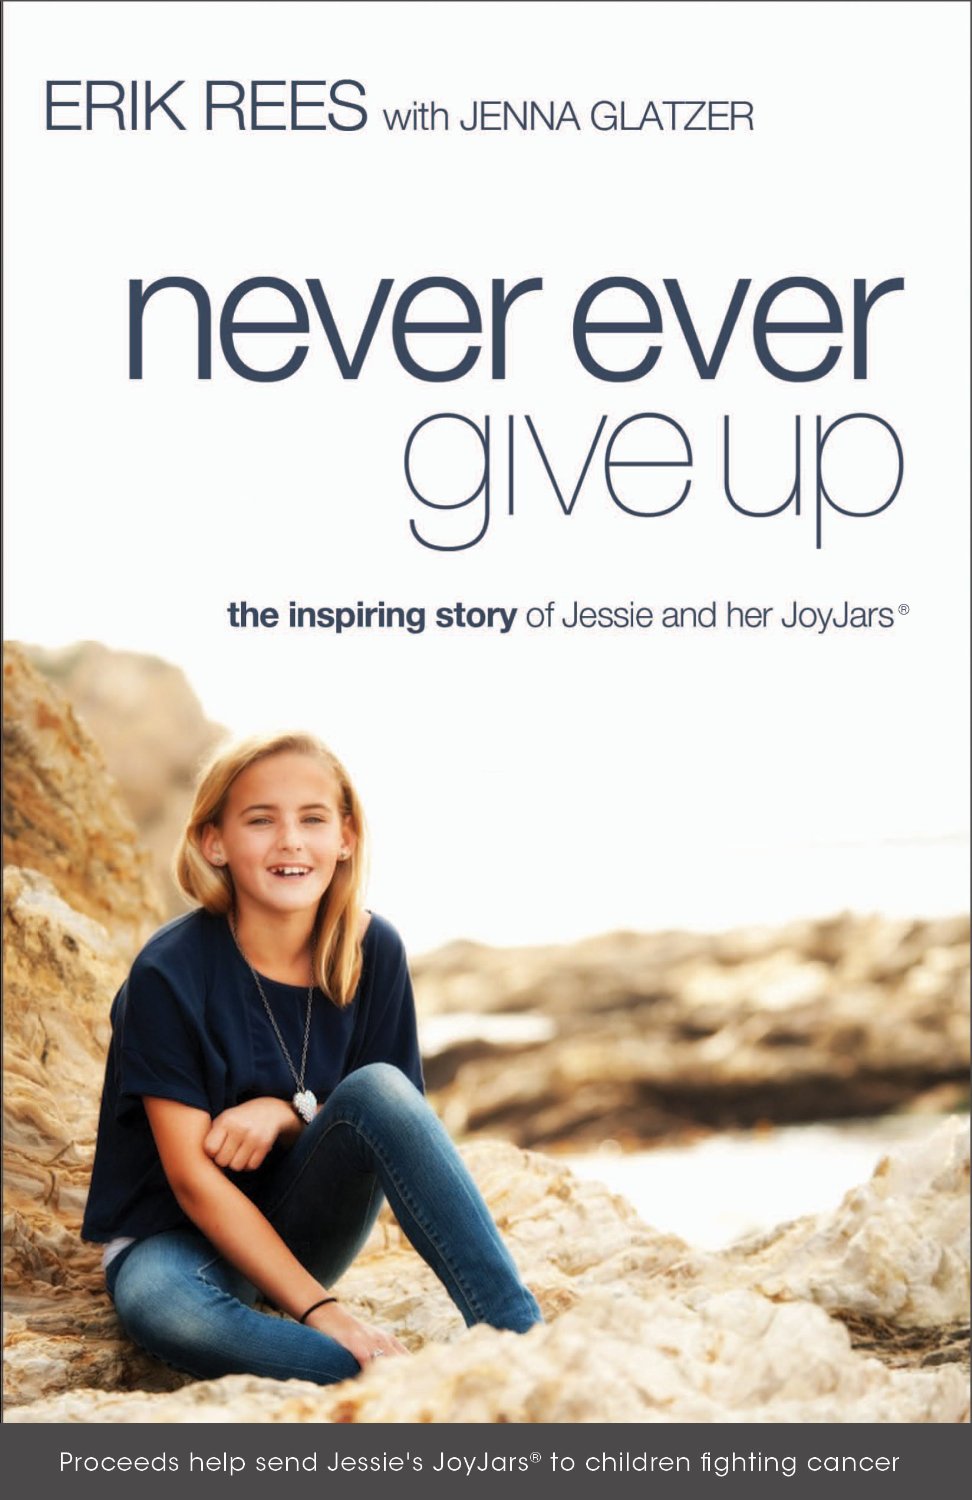 Interview with Never Ever Give Up author Erik Rees